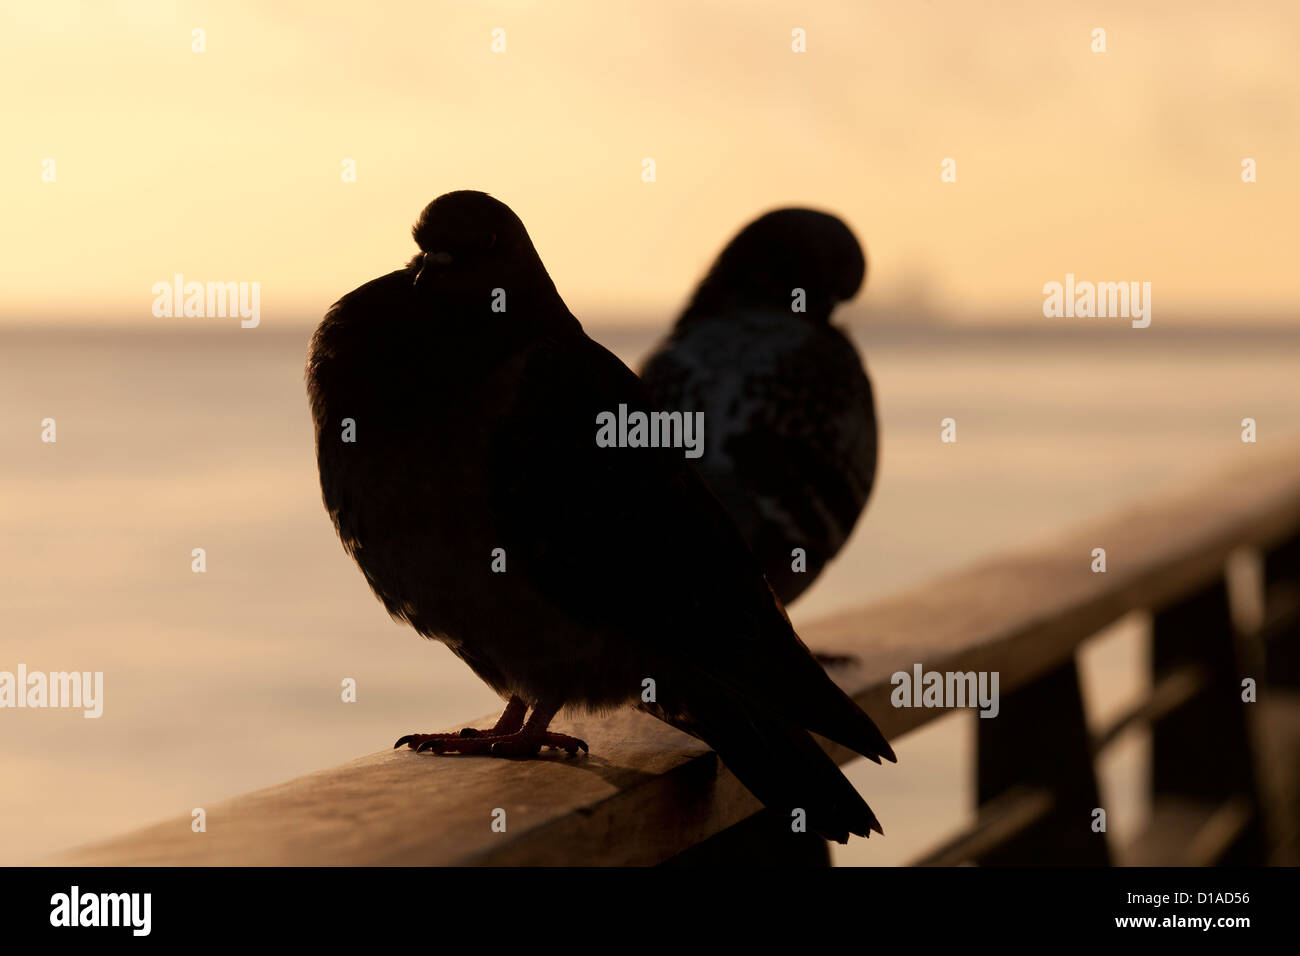 Two pigeons silhouette Stock Photo